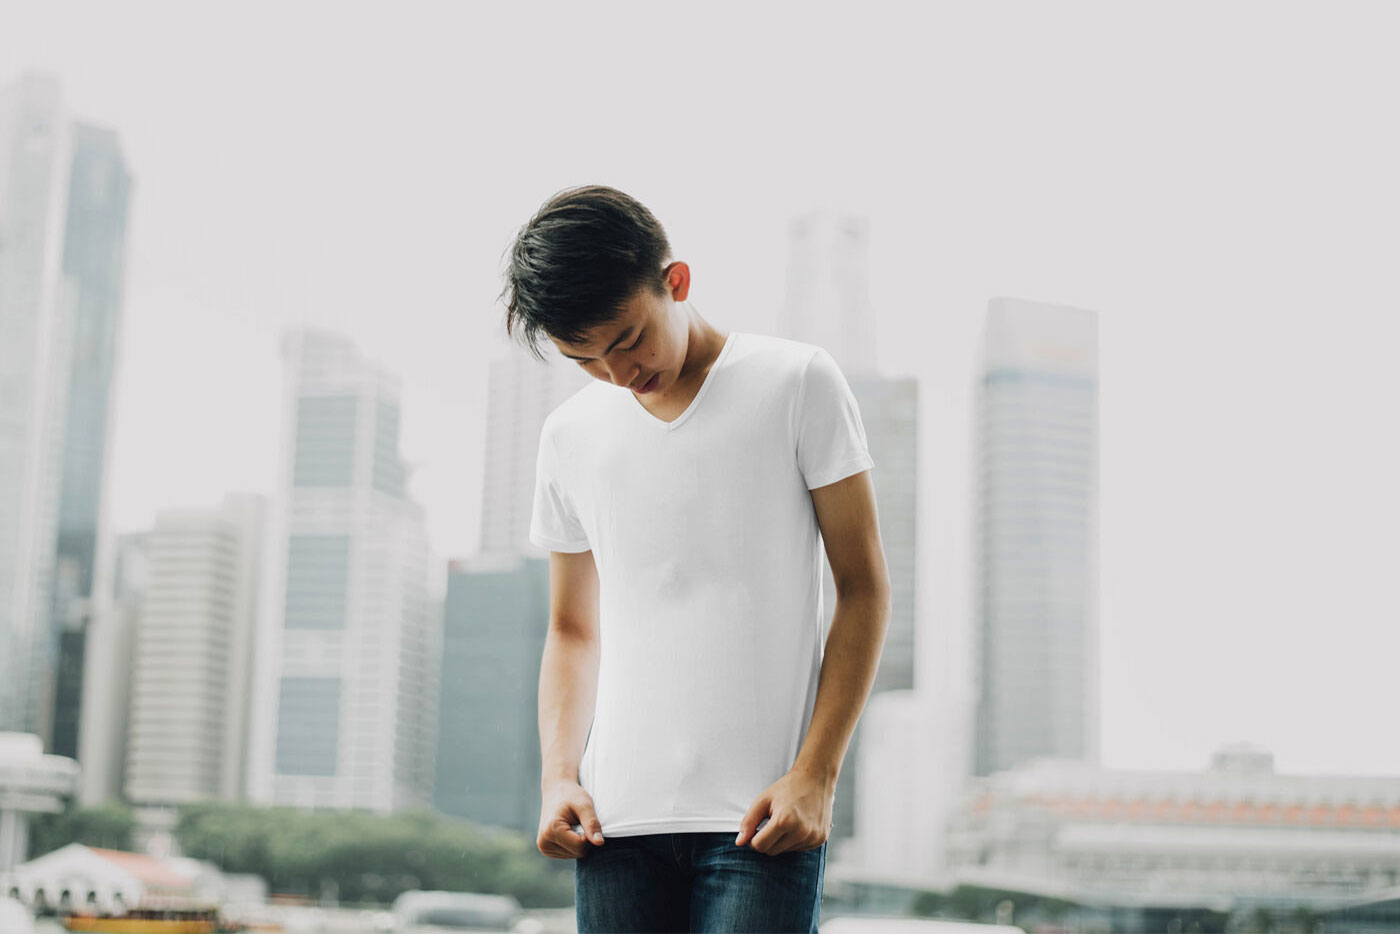 Men's T Shirt With An City Outdoor Background FREE PSD